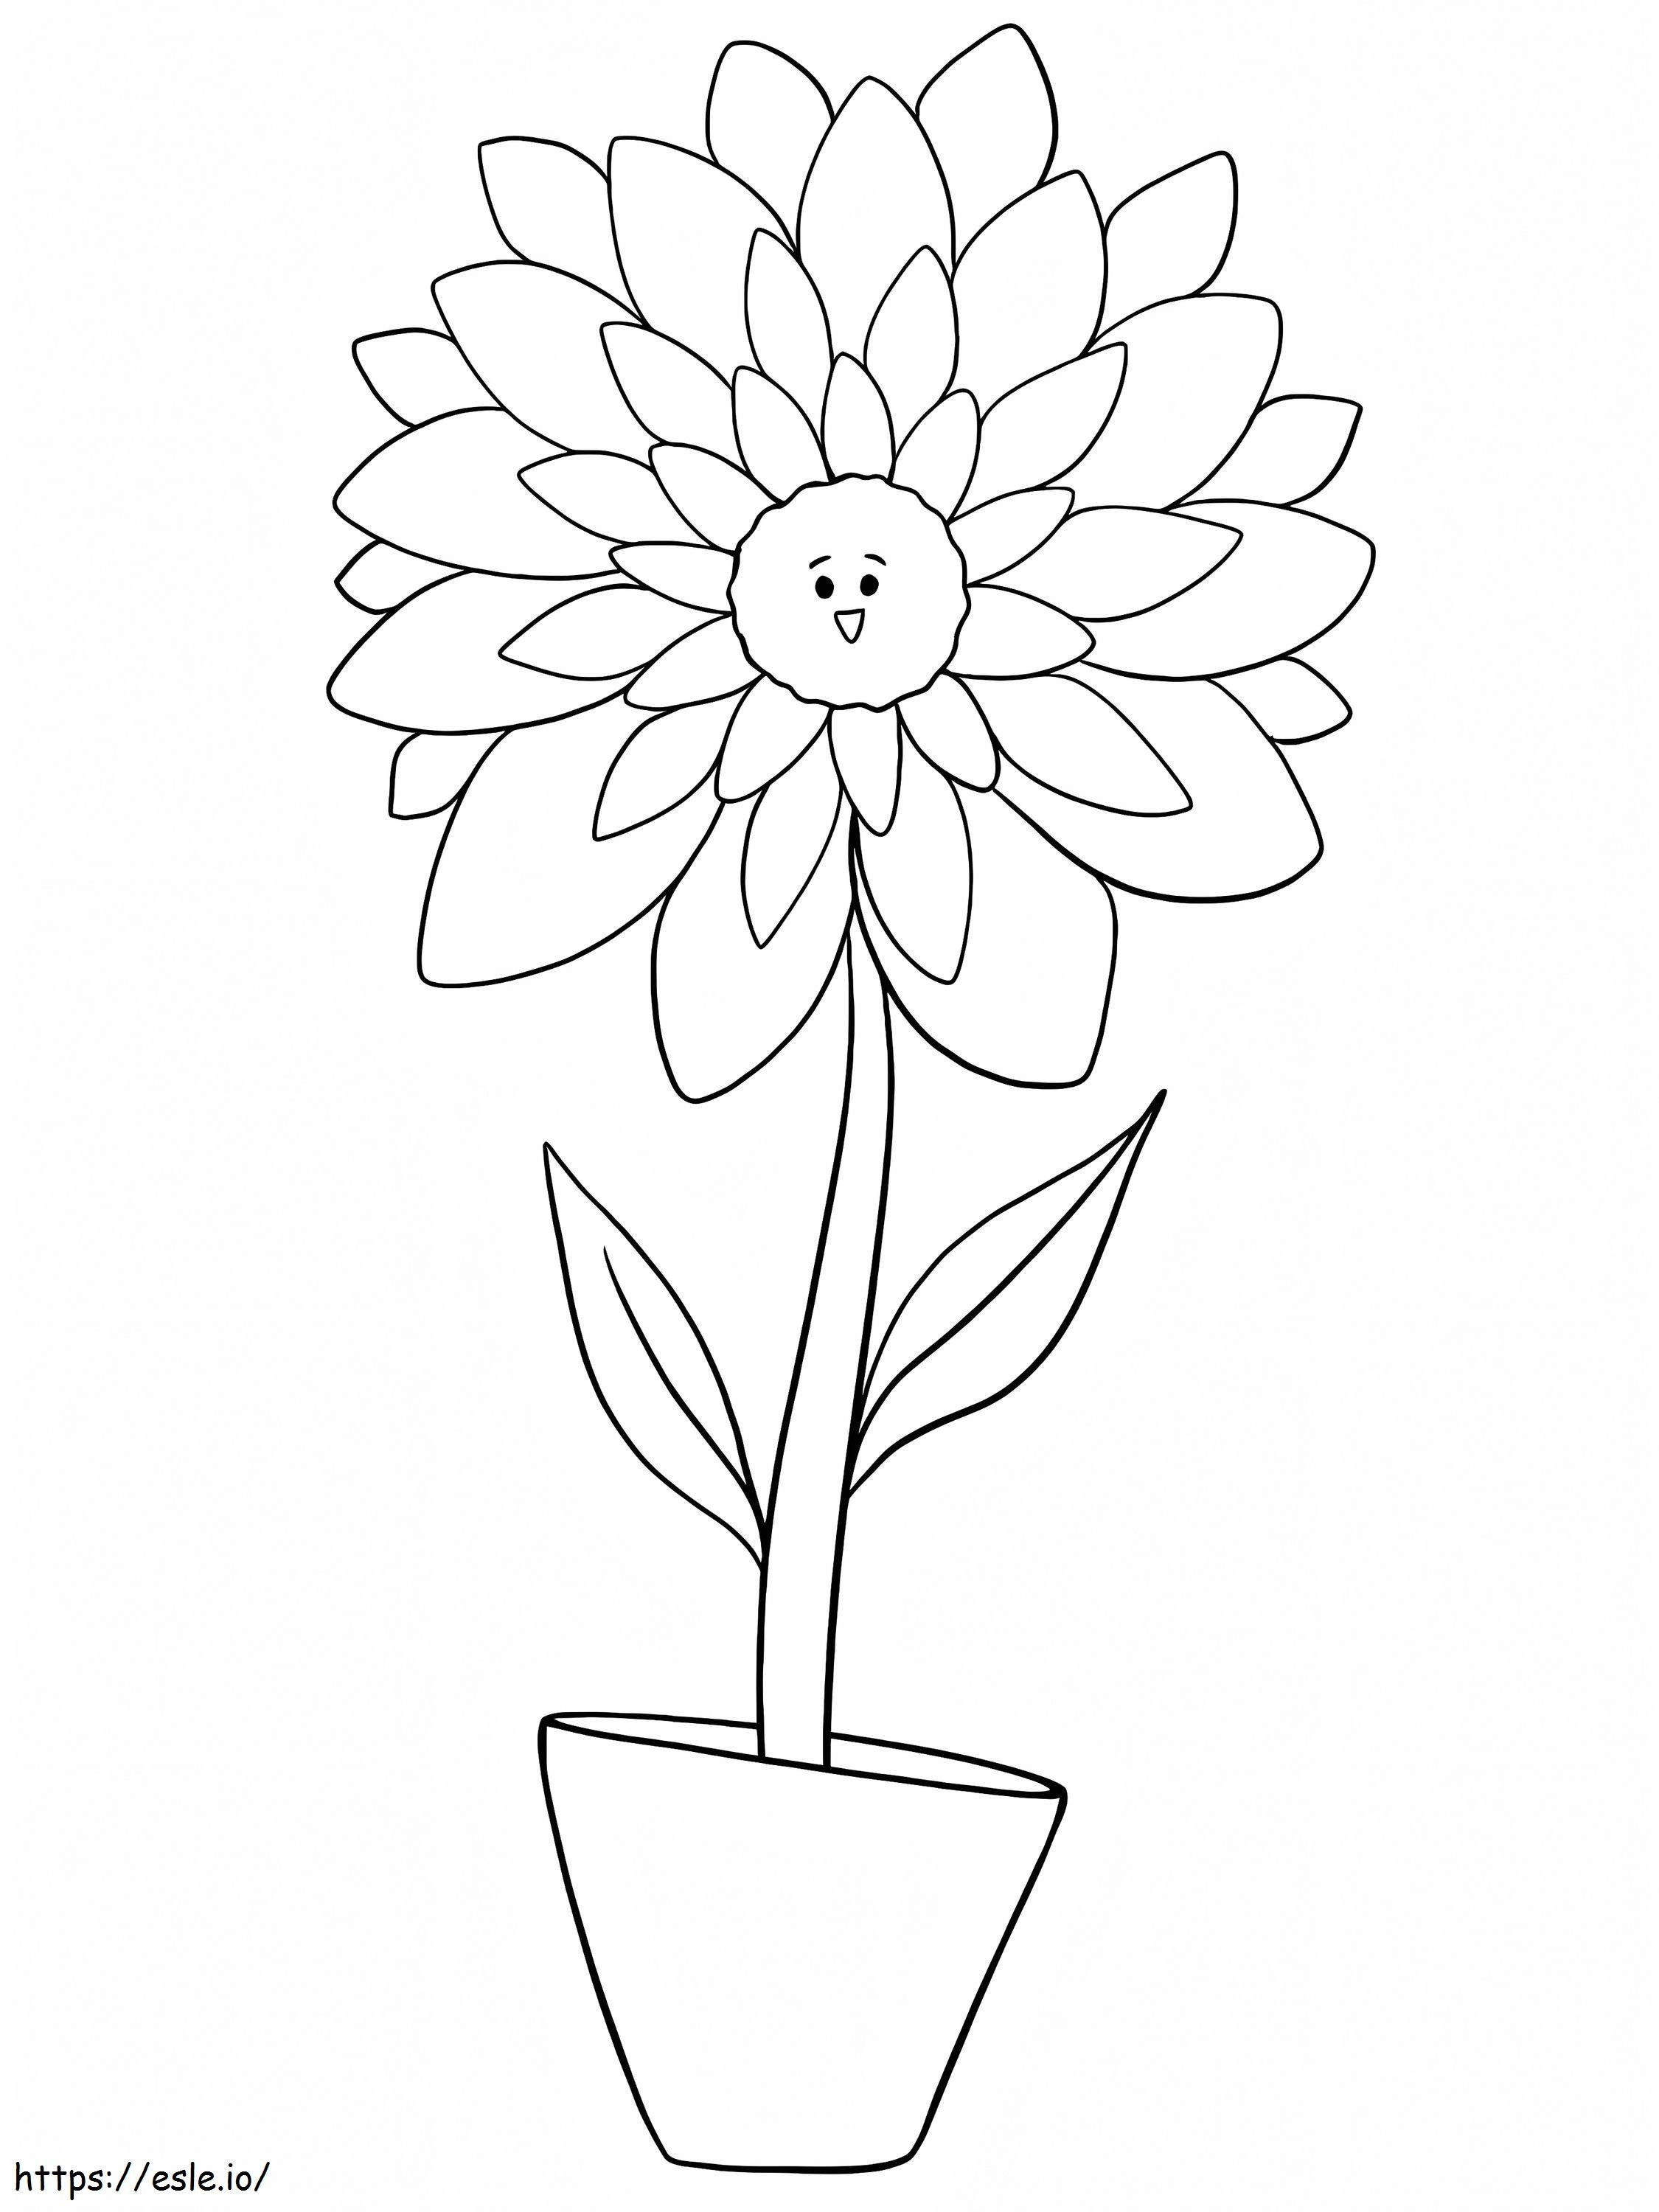 Cute Dahlia Flower coloring page